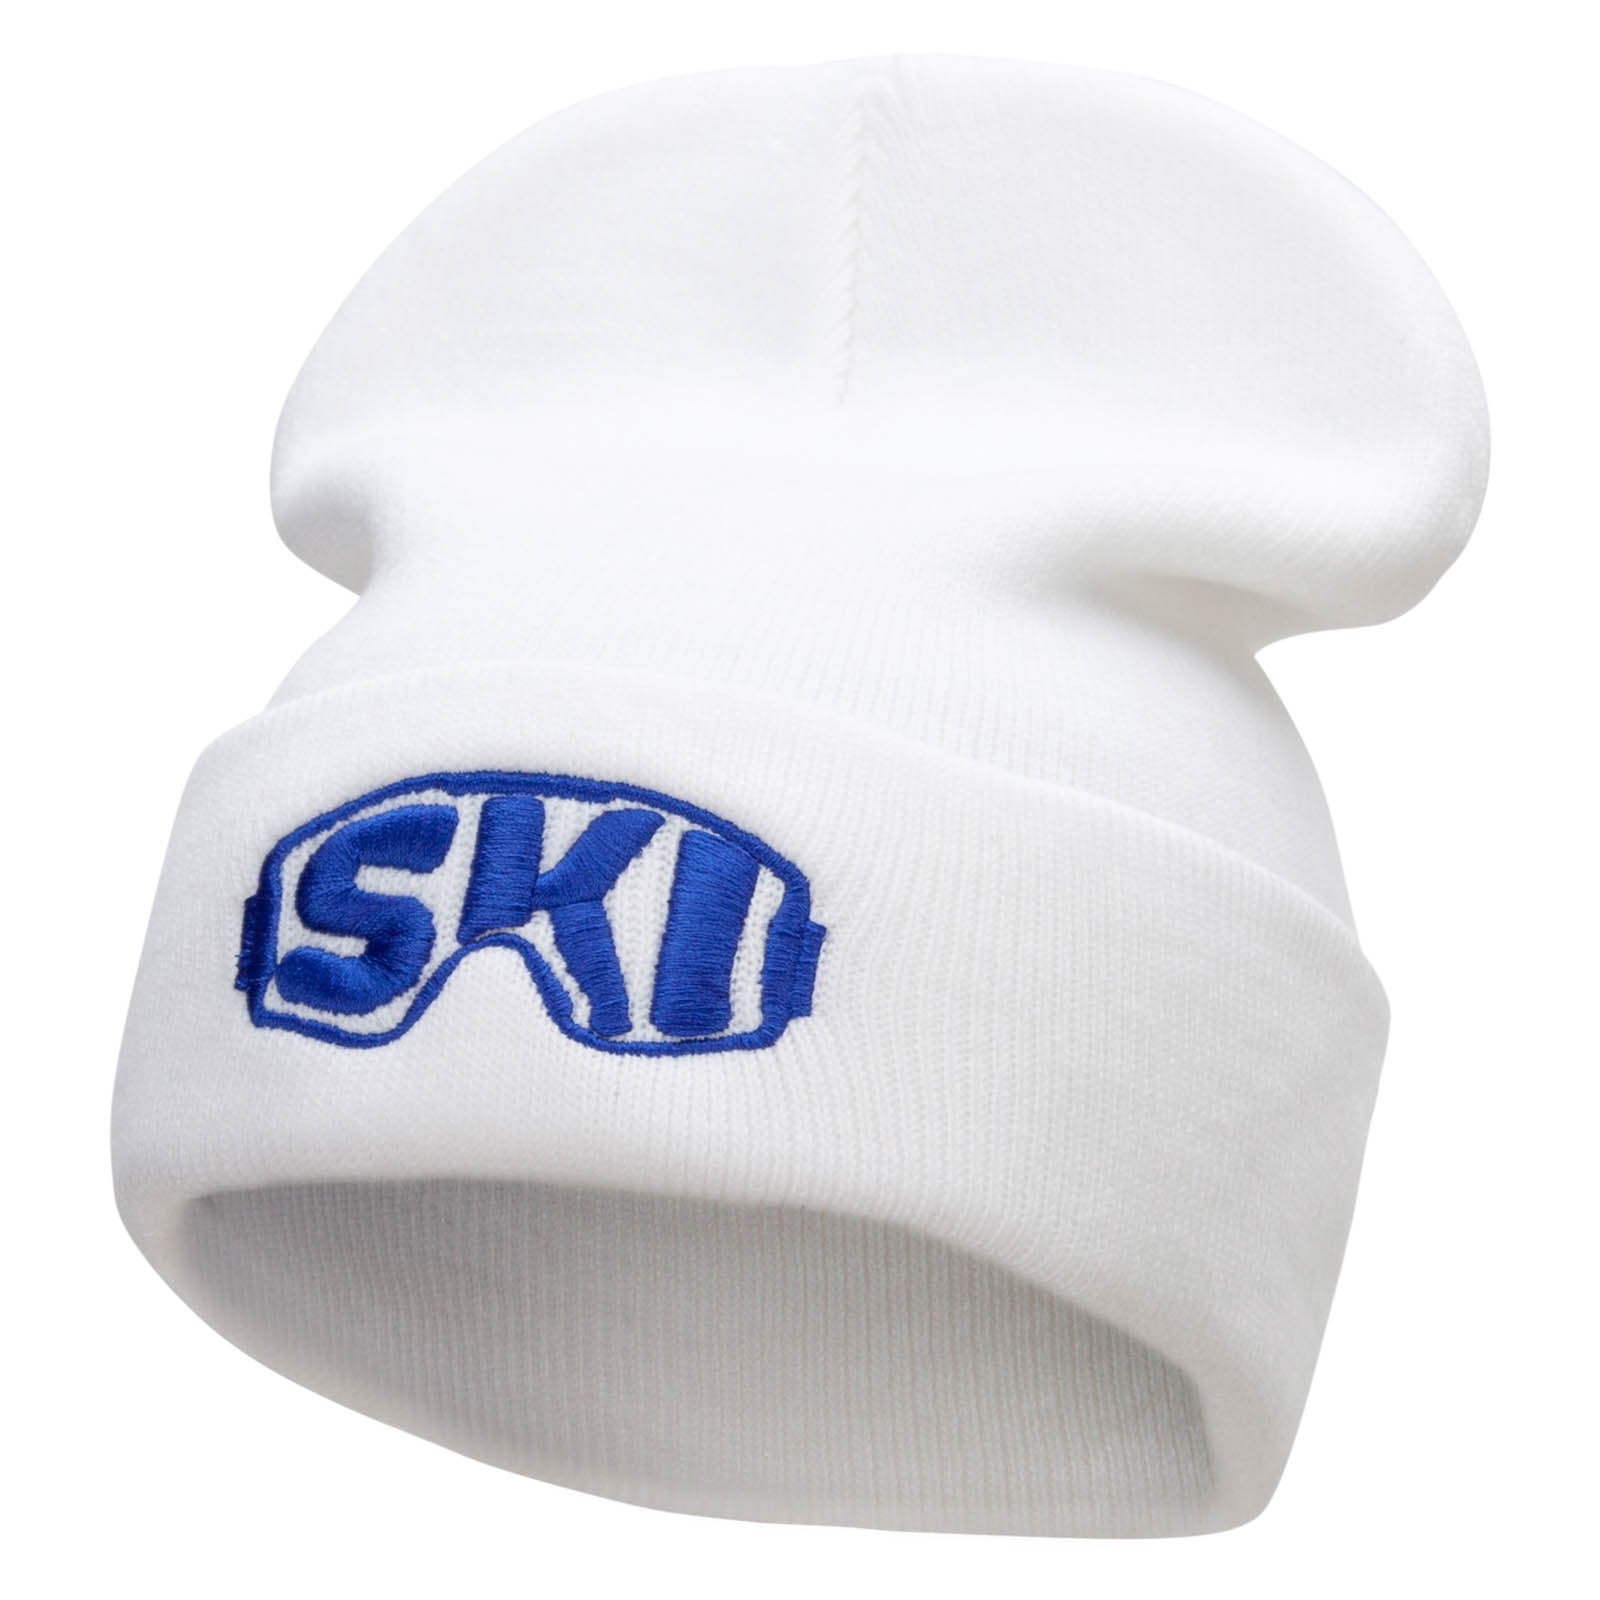 Ski Goggles Embroidered 12 Inch Long Knitted Beanie - White OSFM